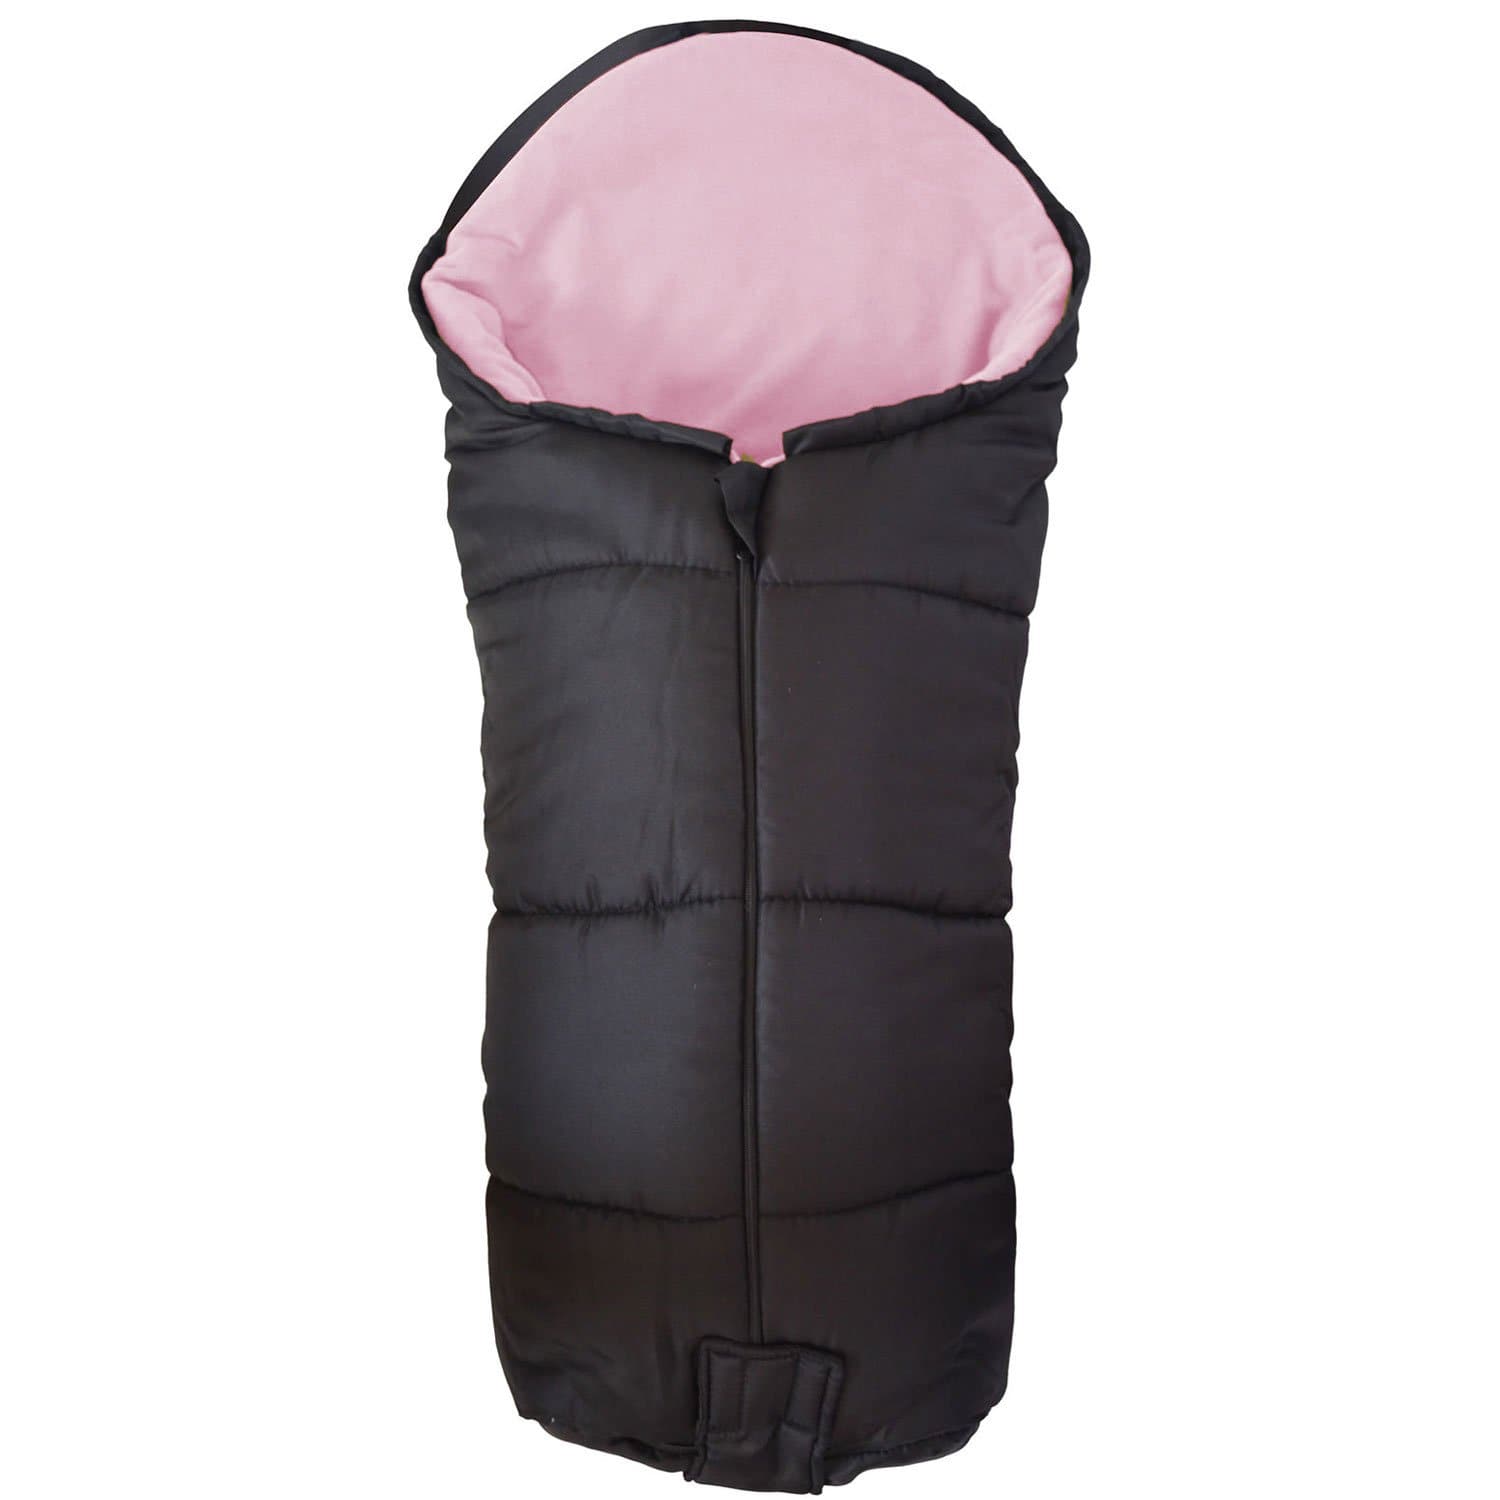 Deluxe Footmuff / Cosy Toes Compatible with Baby Jogger - Light Pink / Fits All Models | For Your Little One